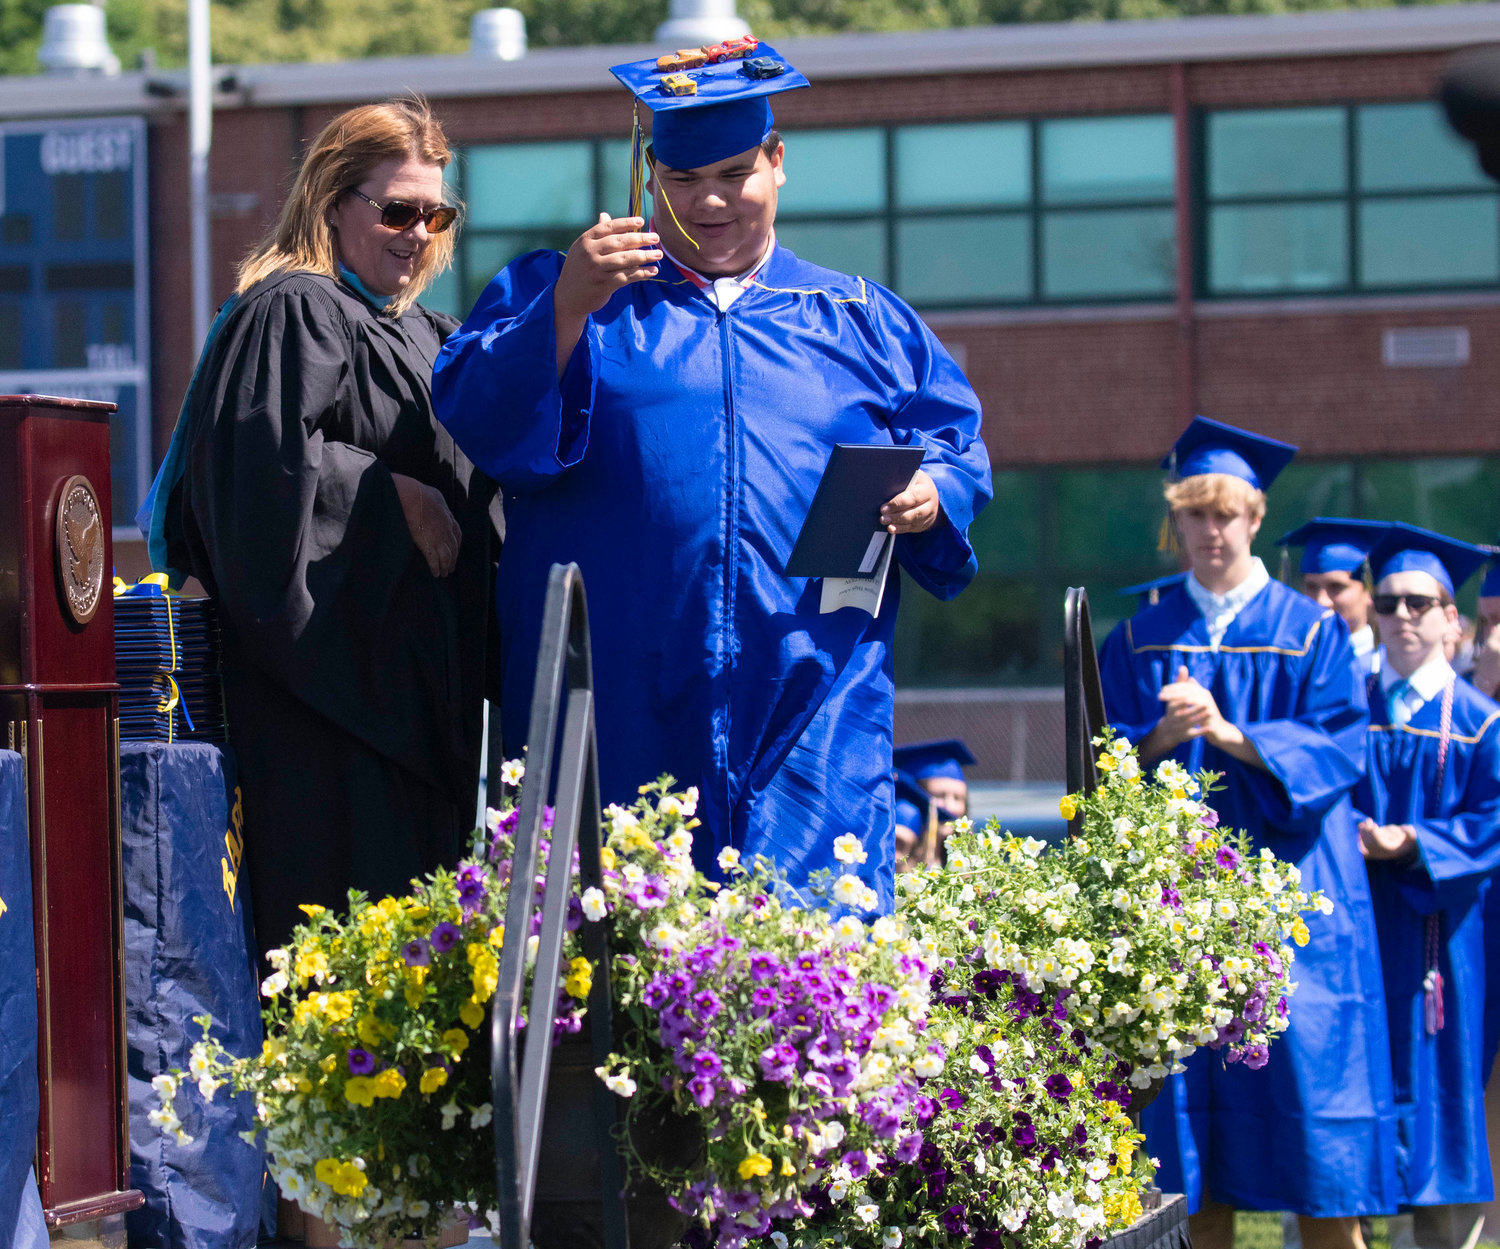 MichaelAngelo Barretto crosses the stage after receiving his diploma during the graduation ceremony at Victory Field on Sunday, June 5.